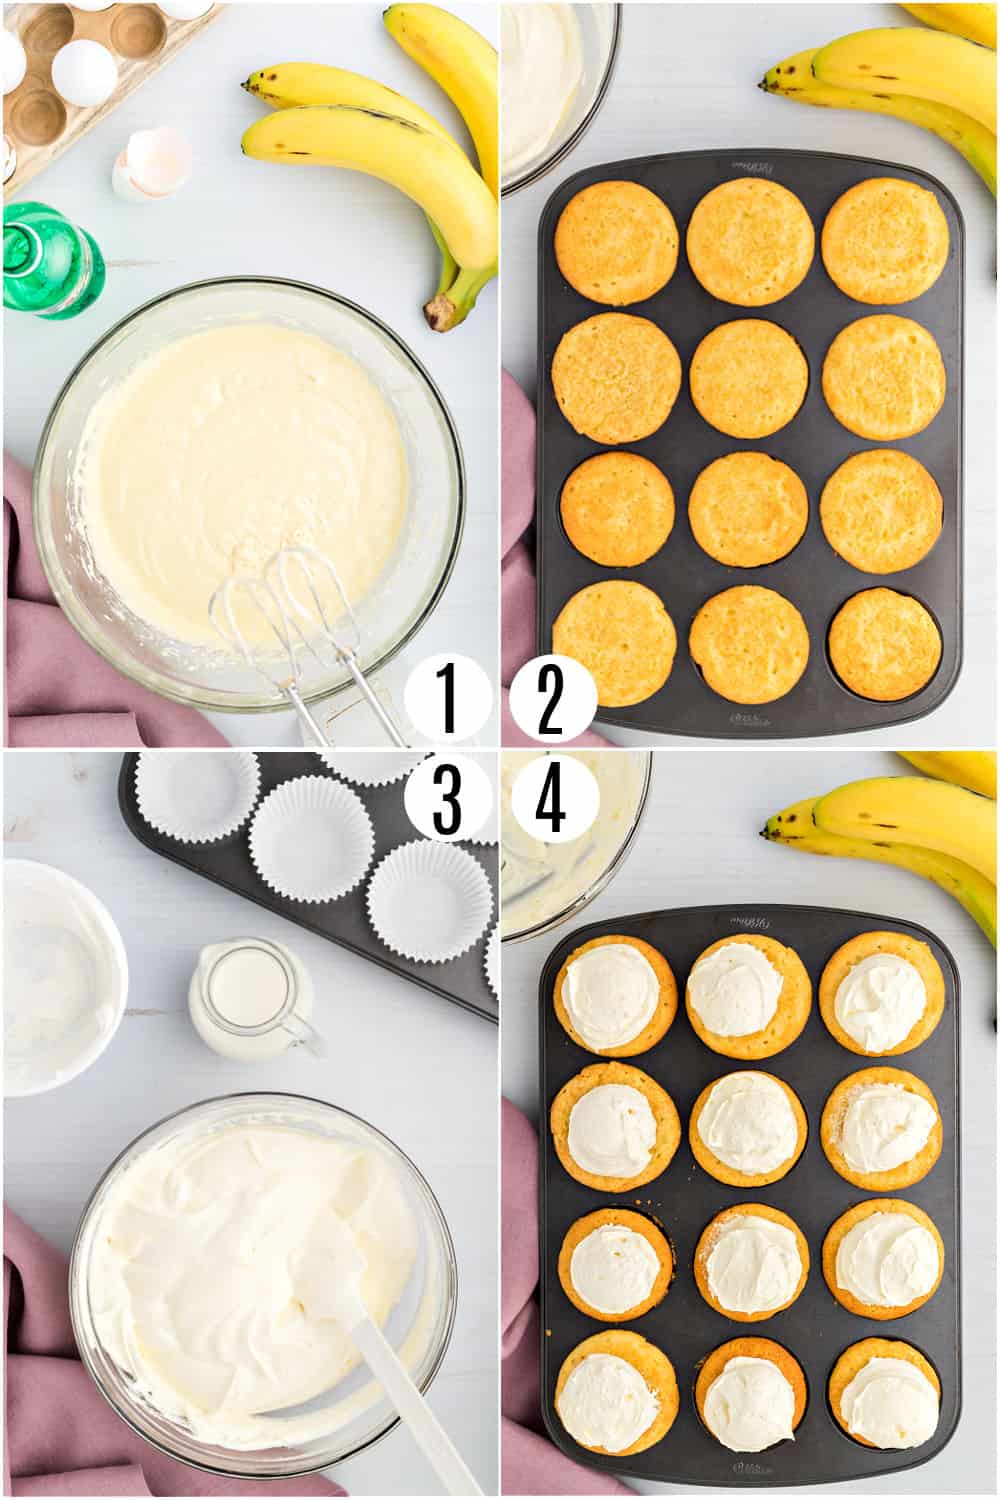 Step by step photos showing how to make banana pudding cupcakes.